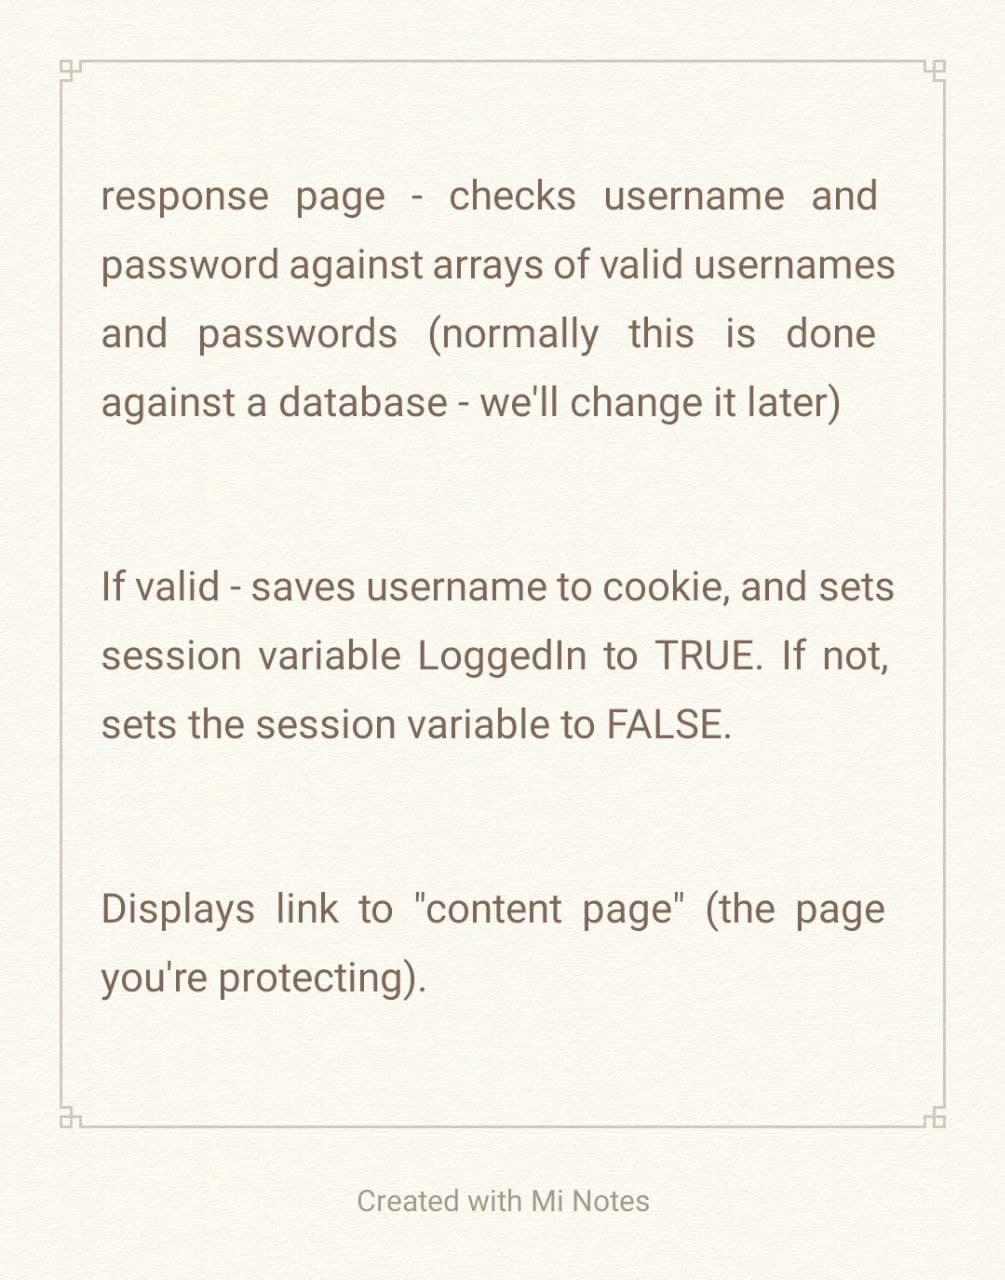 response page checks username and
password against arrays of valid usernames
and passwords (normally this is done
against a database - we'll change it later)
If valid - saves username to cookie, and sets
session variable LoggedIn to TRUE. If not,
sets the session variable to FALSE.
Displays link to "content page" (the page
you're protecting).
Created with Mi Notes